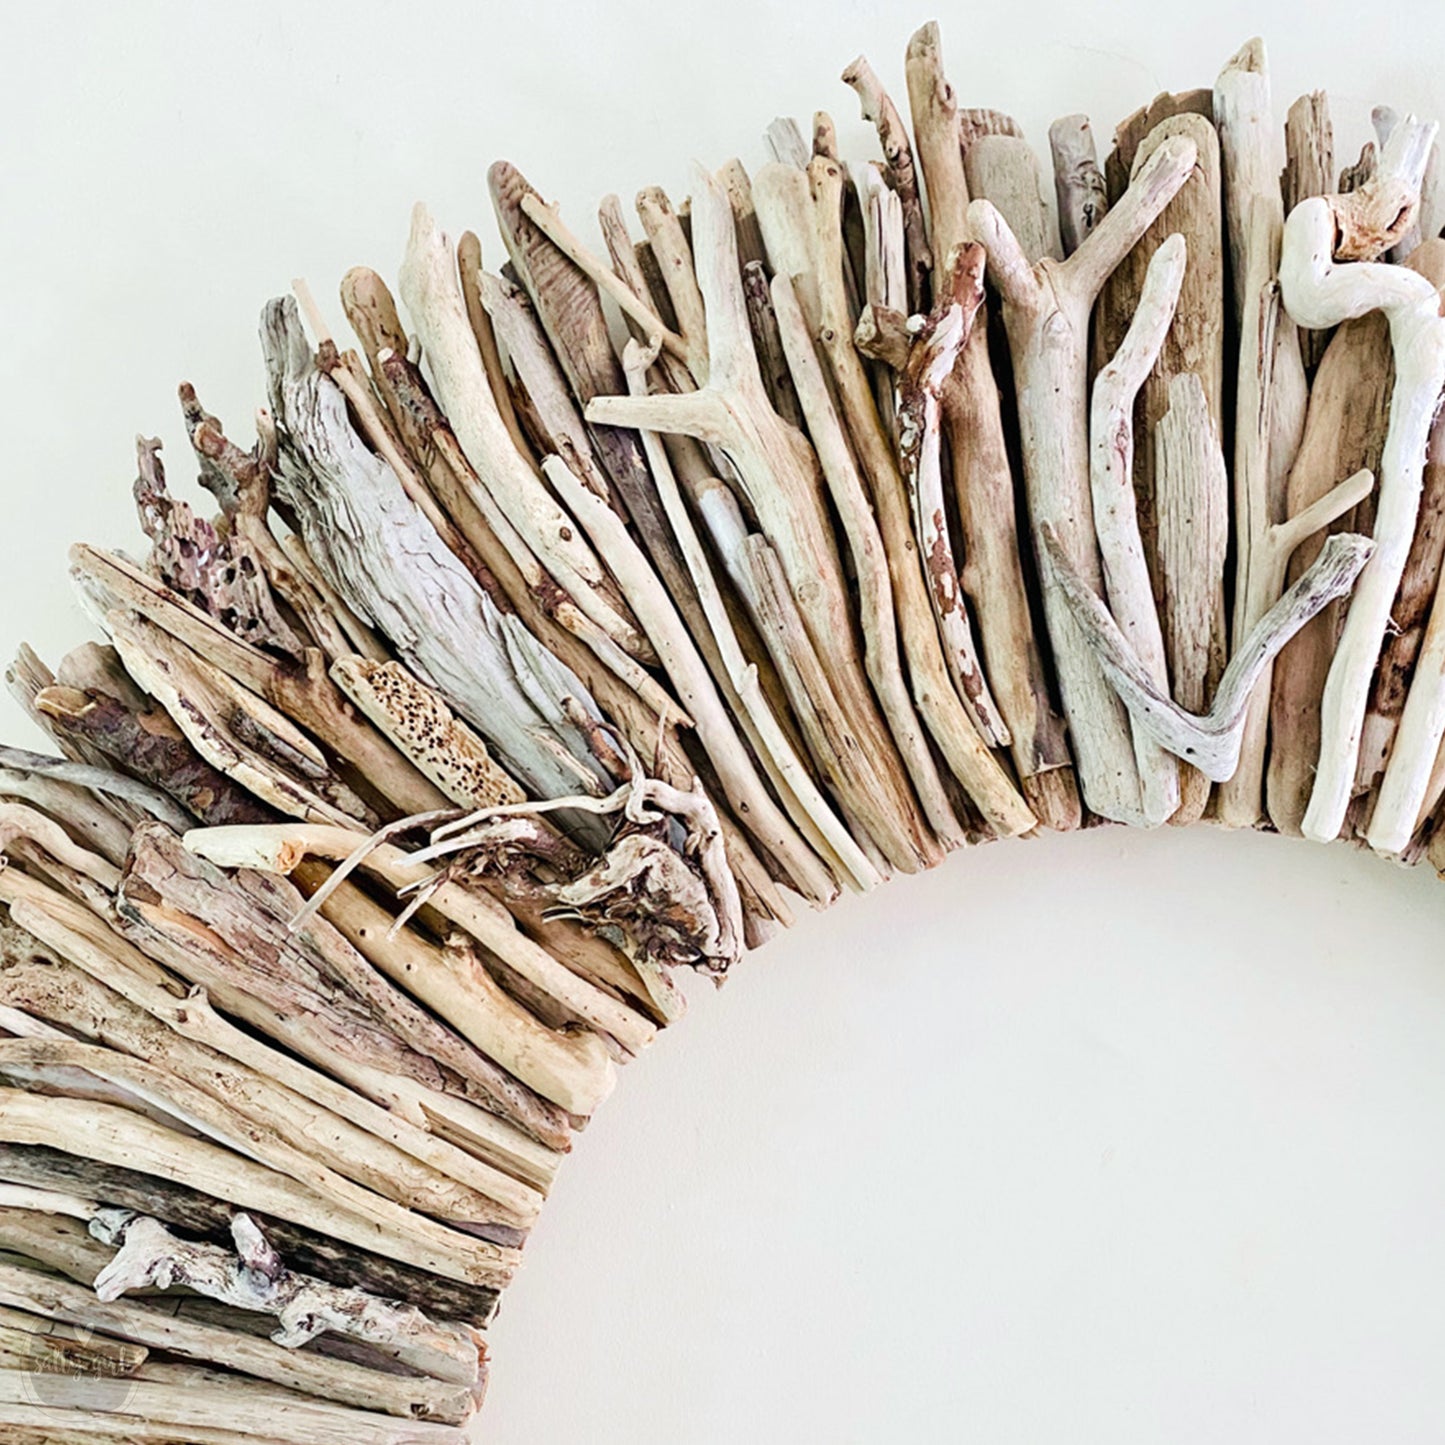 Driftwood Wreath with Unique Natural Accents - Sizes 12"-16"-20”